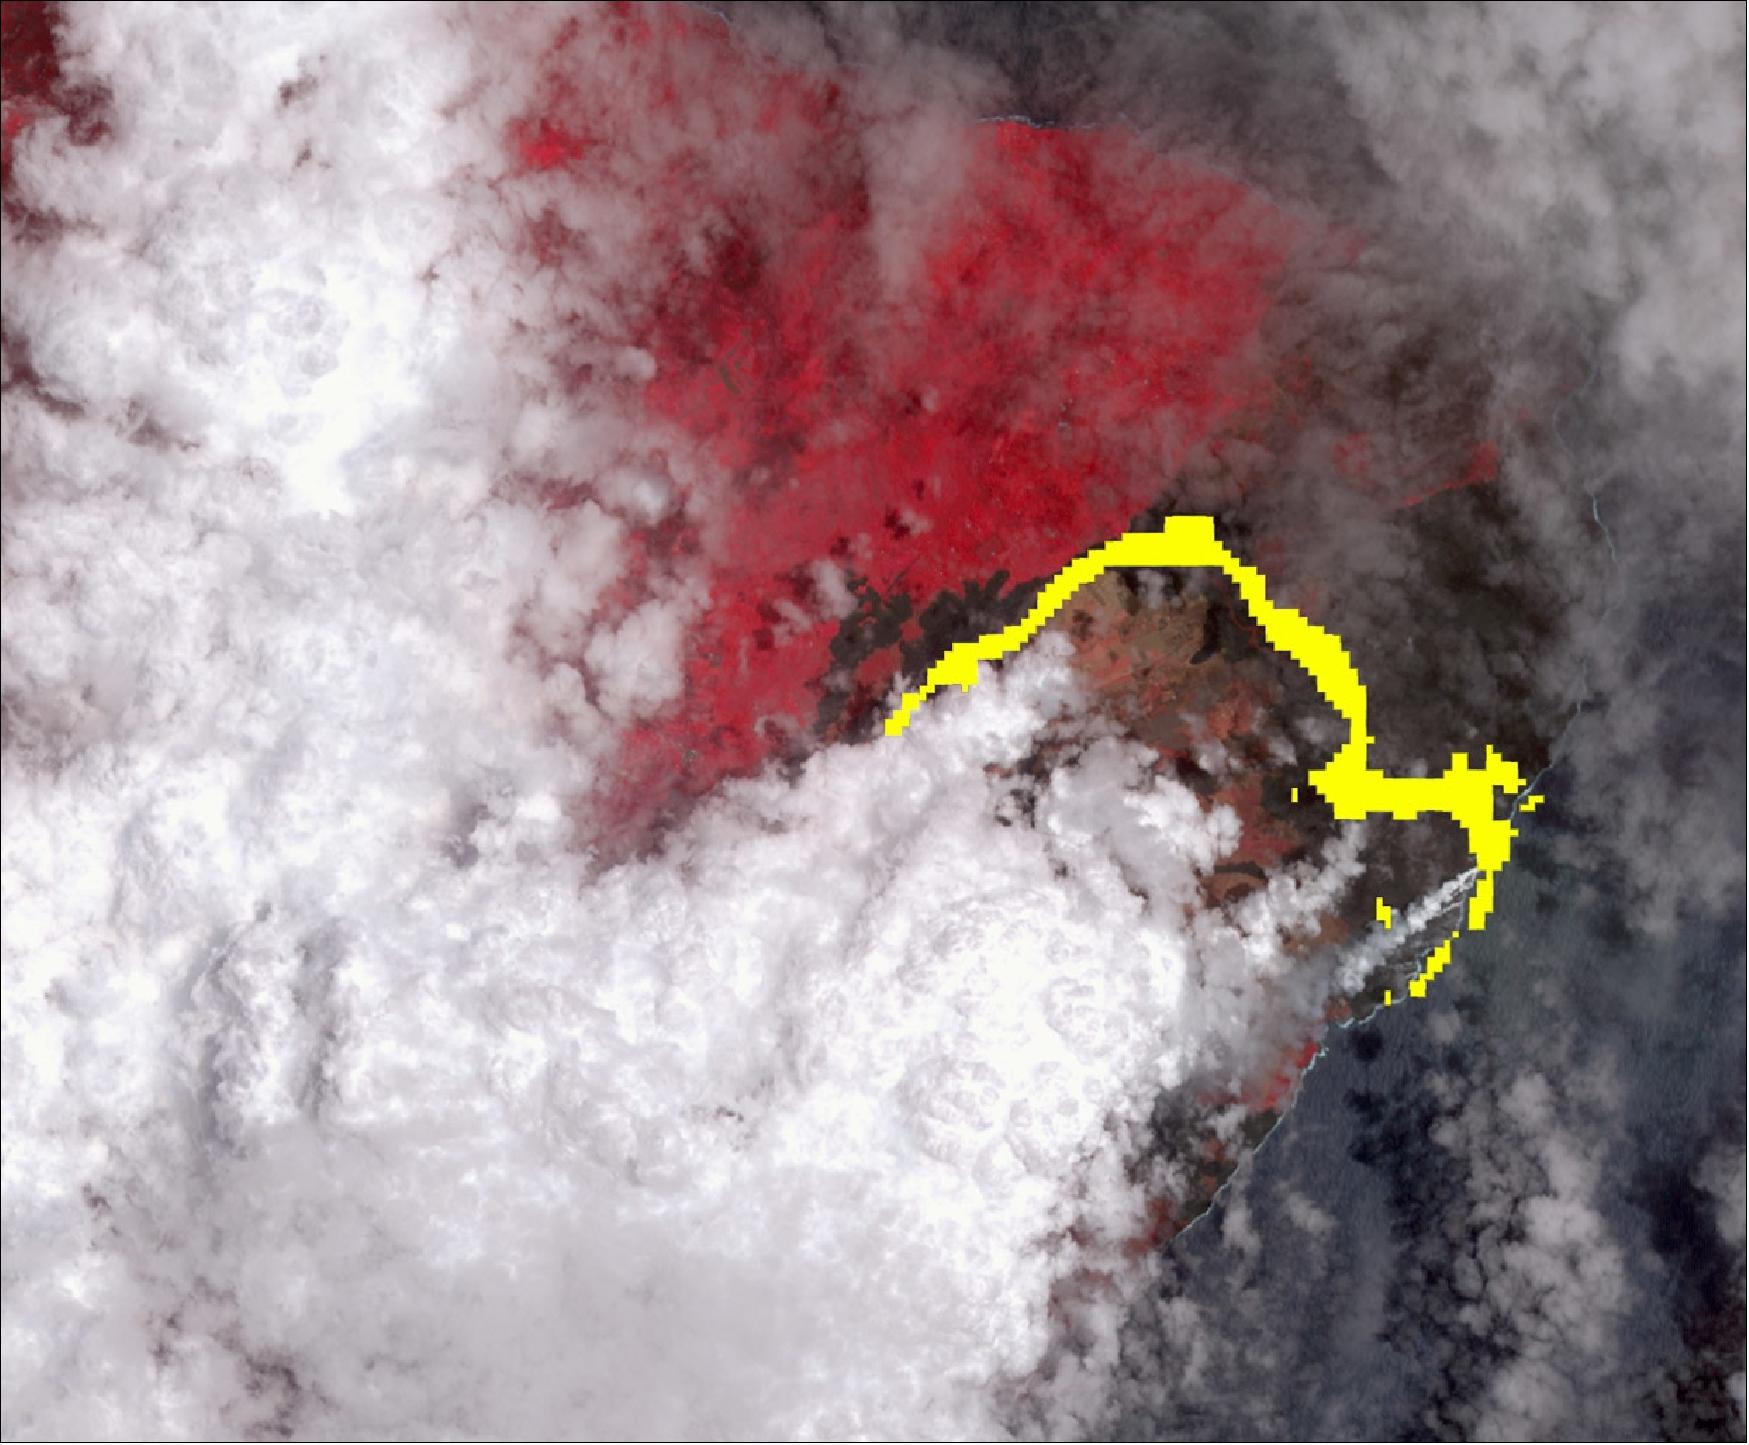 Figure 18: In this image, vegetation is displayed in red, clouds are white and the hot lava flows, detected by ASTER's thermal infrared channels, are overlaid in yellow. The image covers an area of 15.3 x 18.6 kilometers (image credit: NASA/METI/AIST/Japan Space Systems, and U.S./Japan ASTER Science Team)